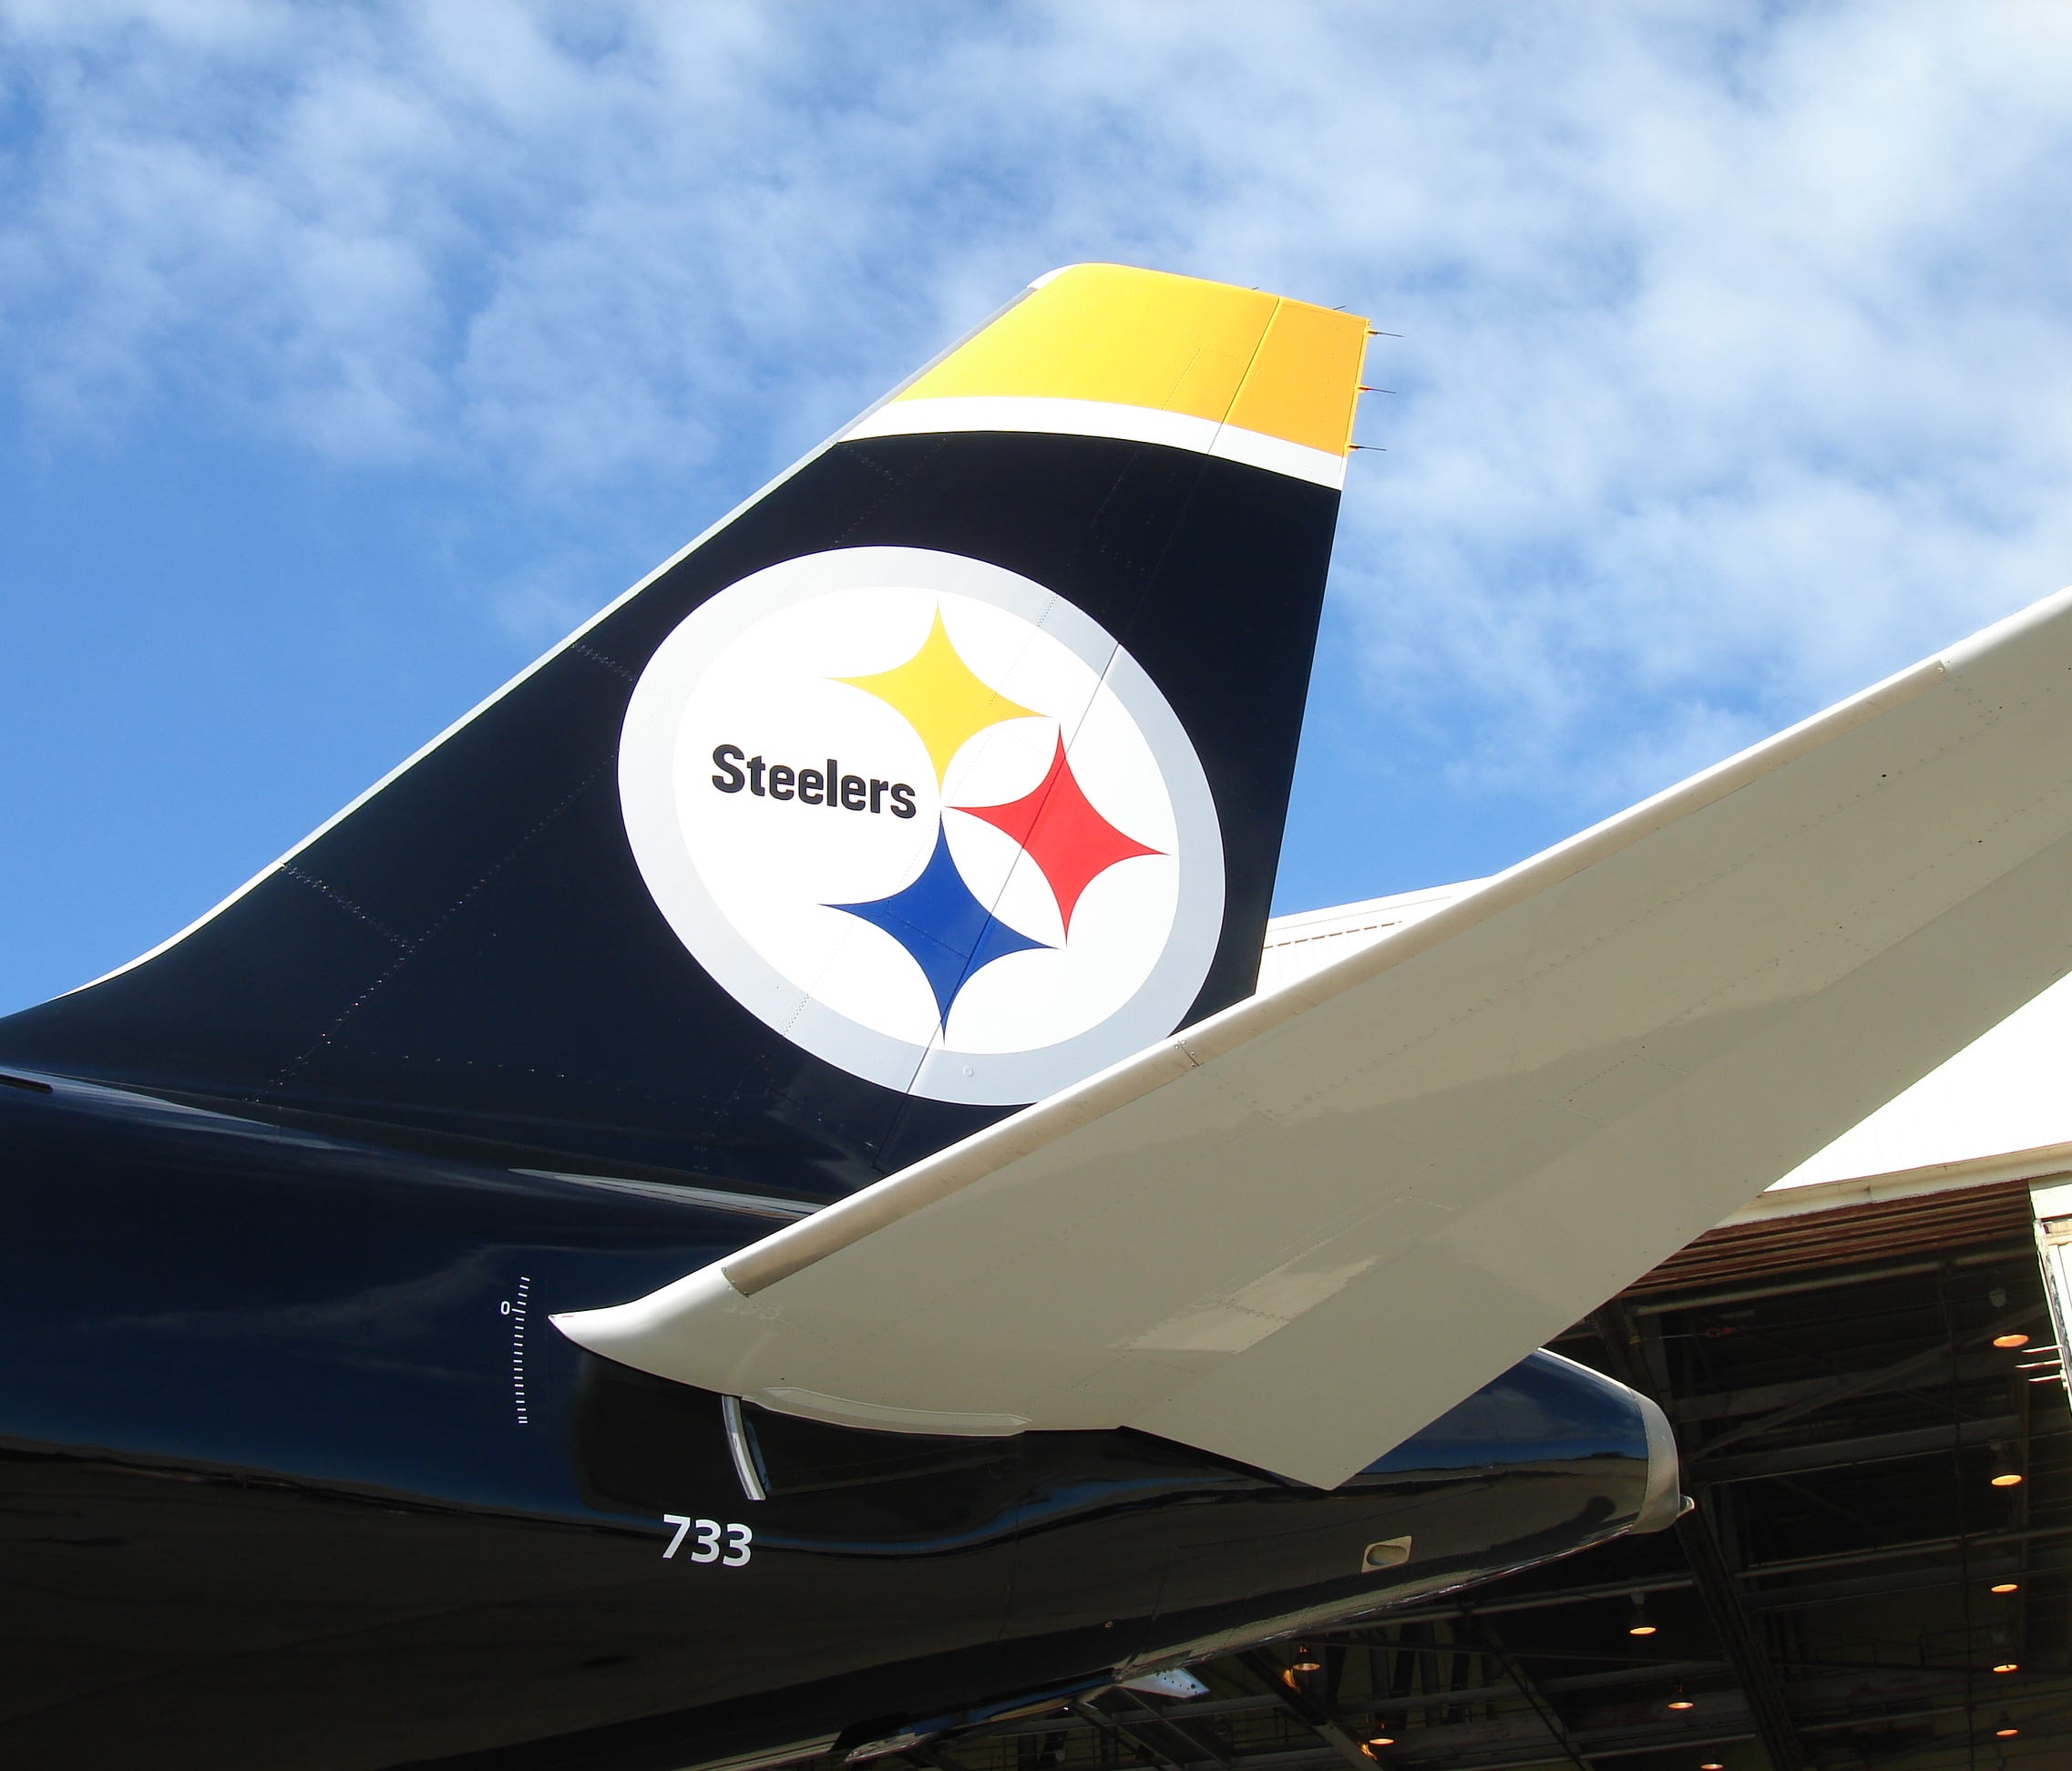 US Airways, which has since merger with American, unveiled this Airbus A319 with a Pittsburgh Steelers paint scheme in September 2007.